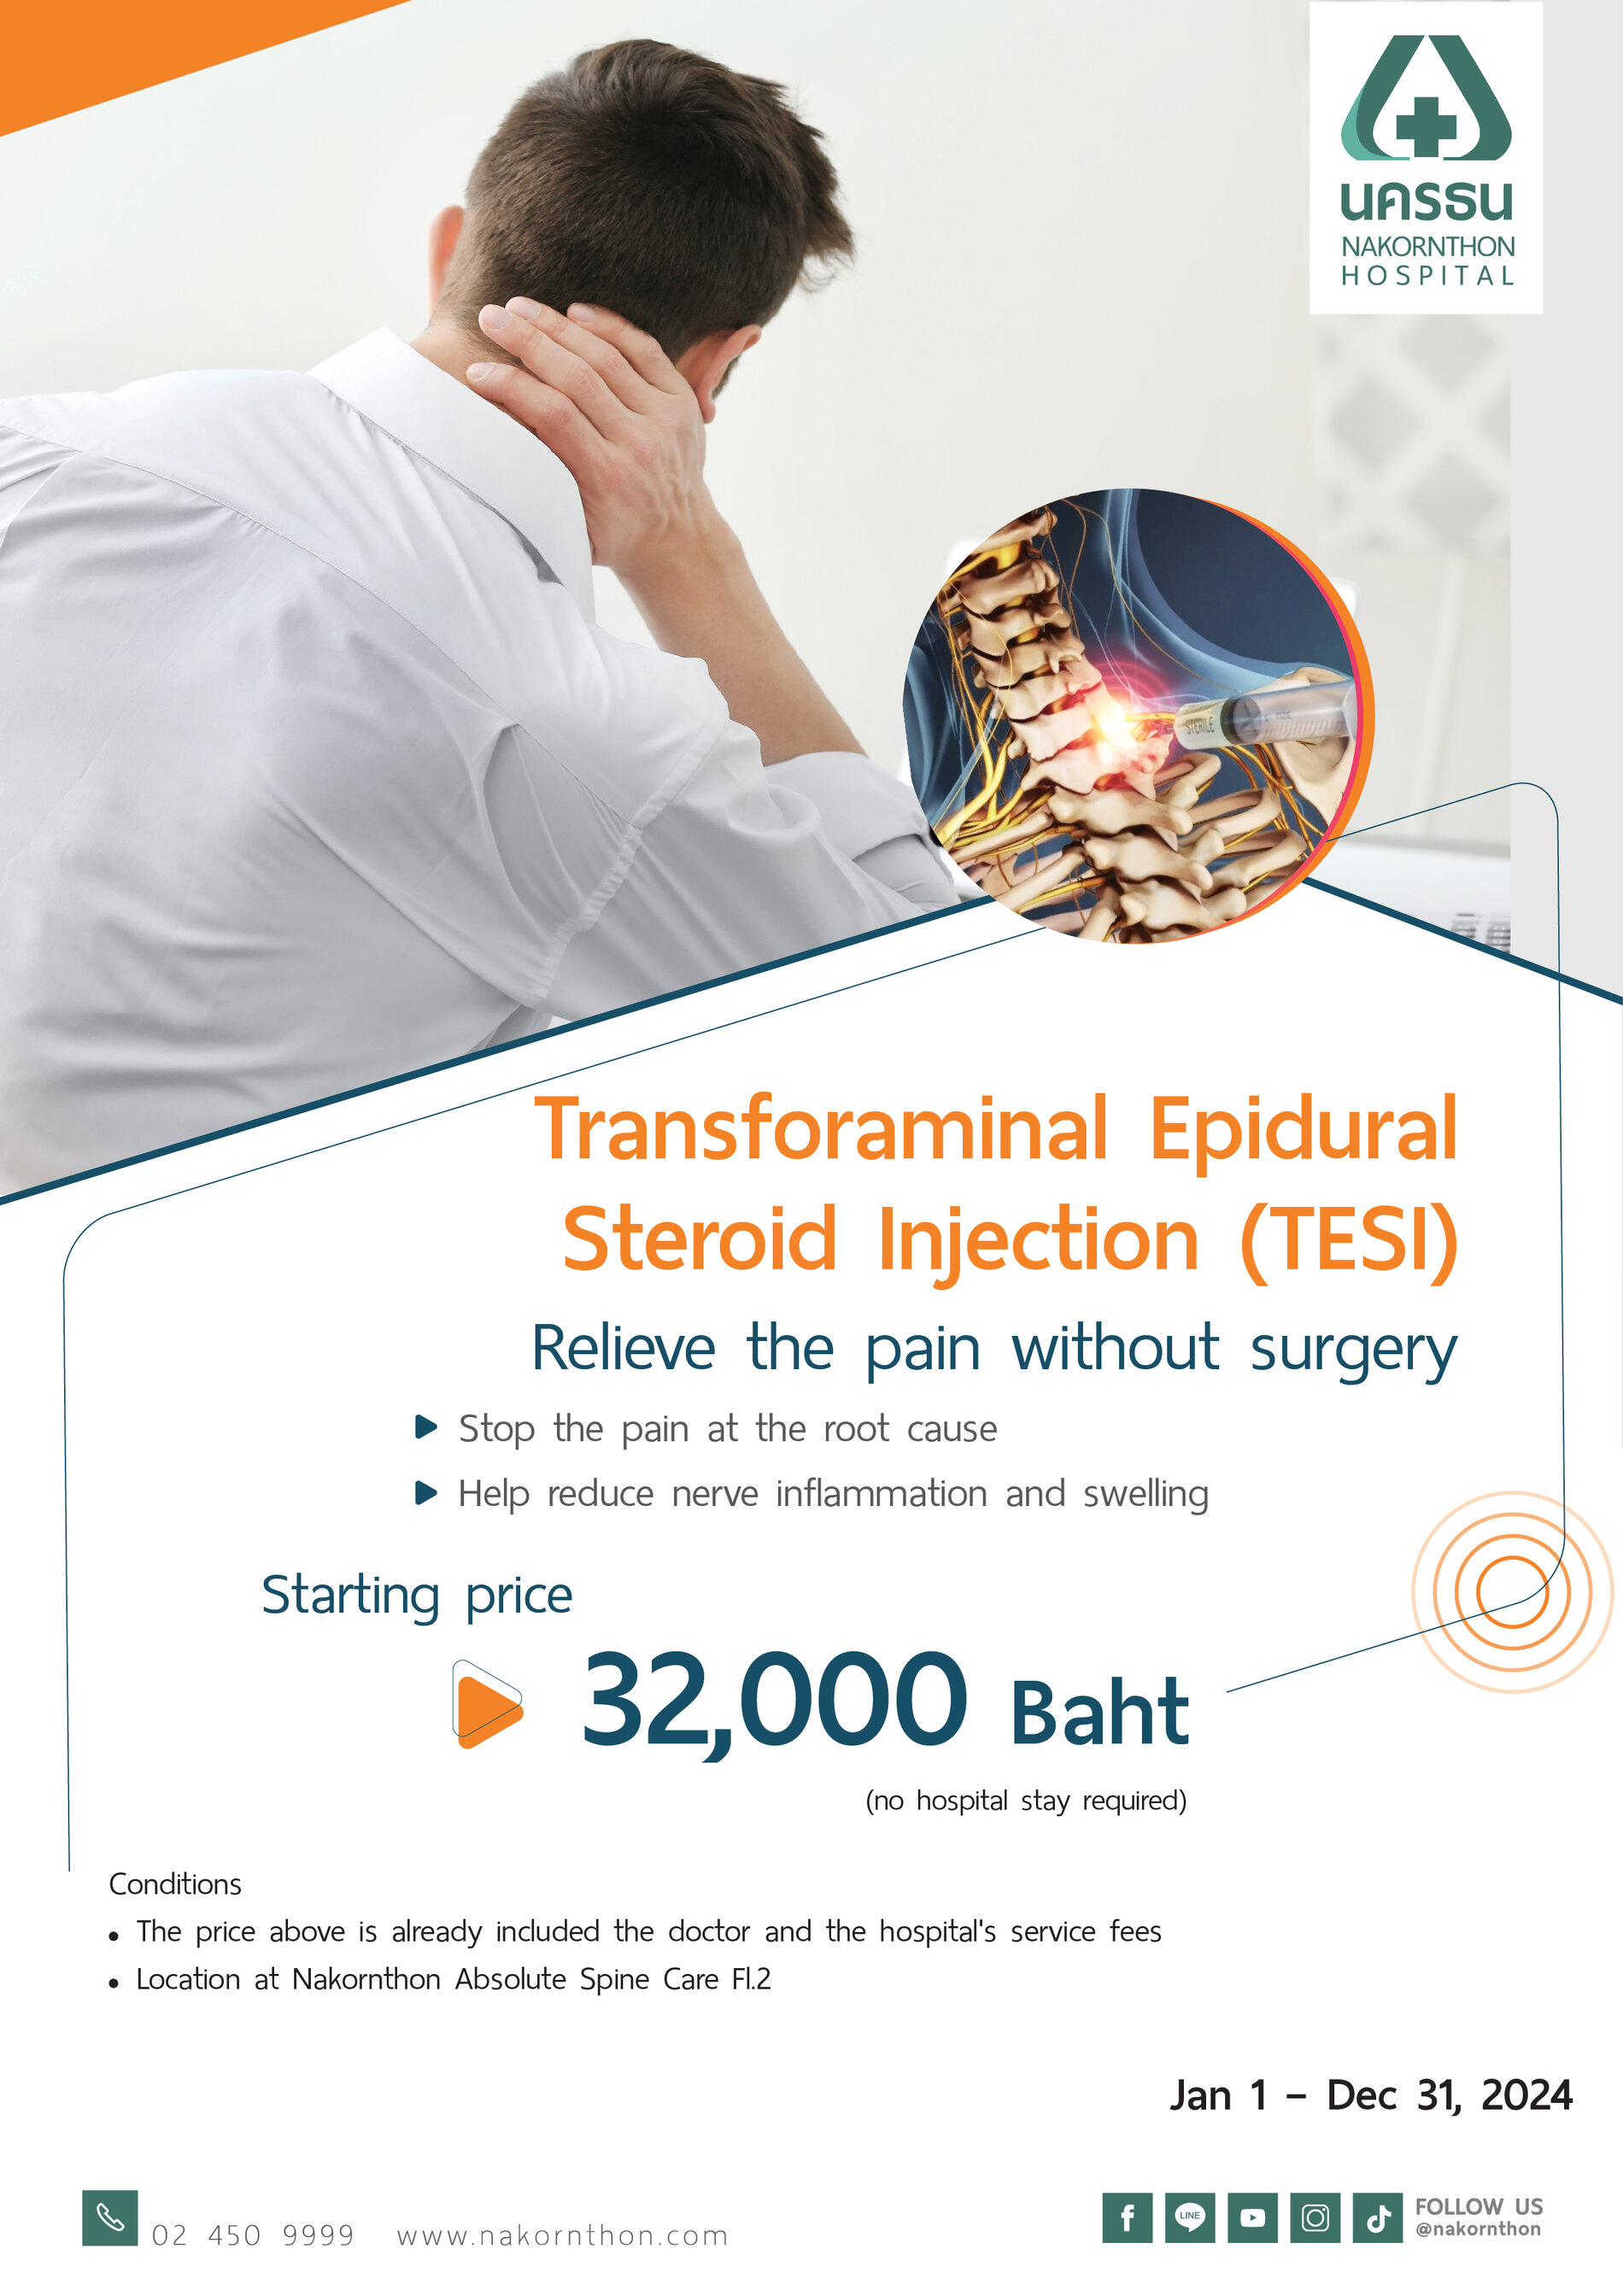 Transforaminal Epidural Steroid Injection (TESI), Relieve the pain without surgery